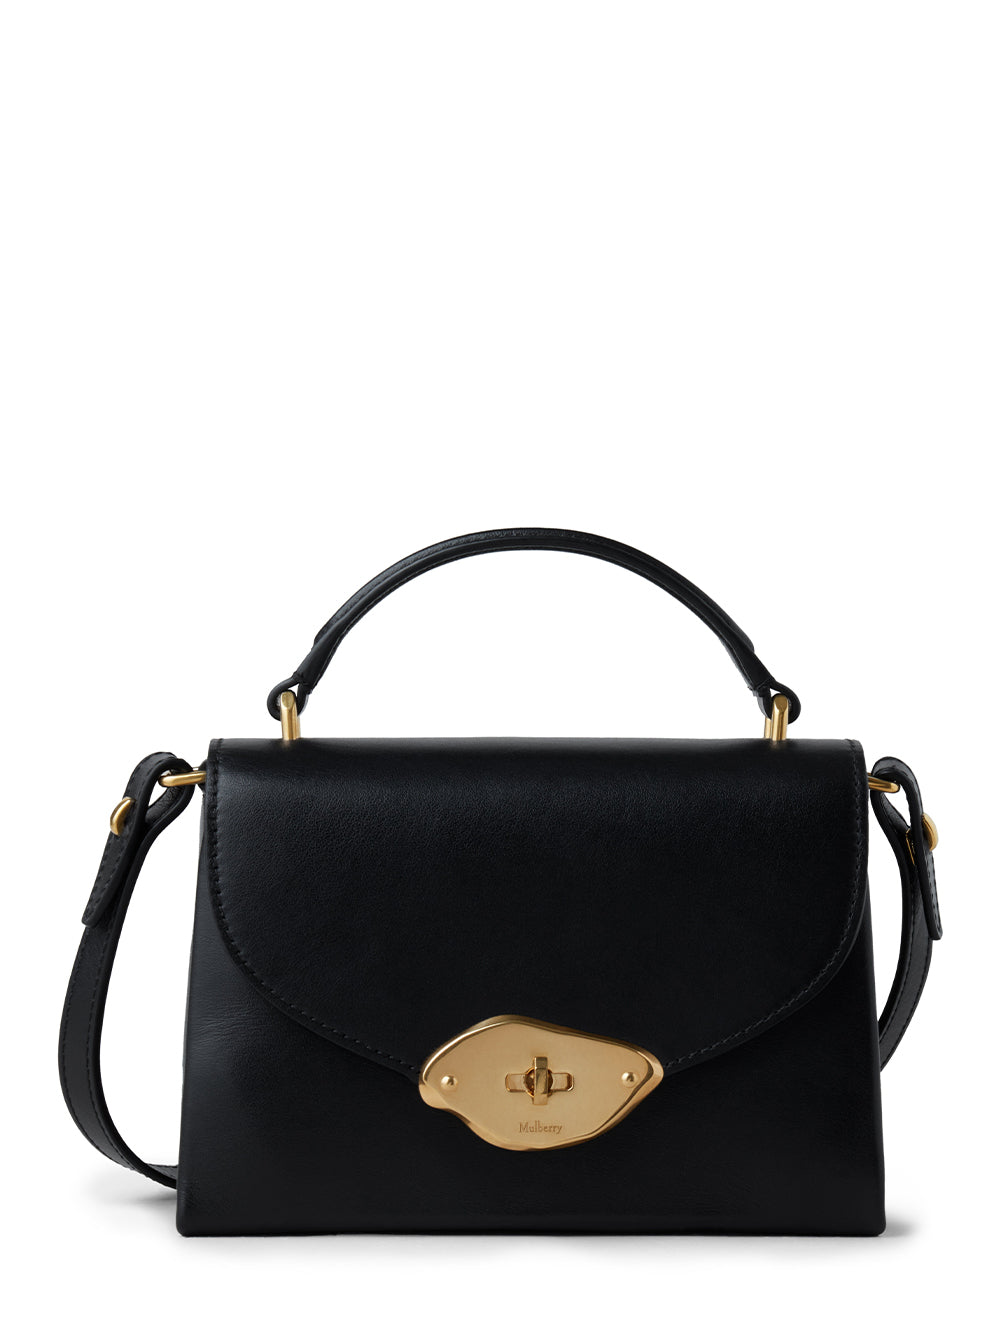 Mulberry-SmallLanaTopHandle-BlackHighGlossLeather-1